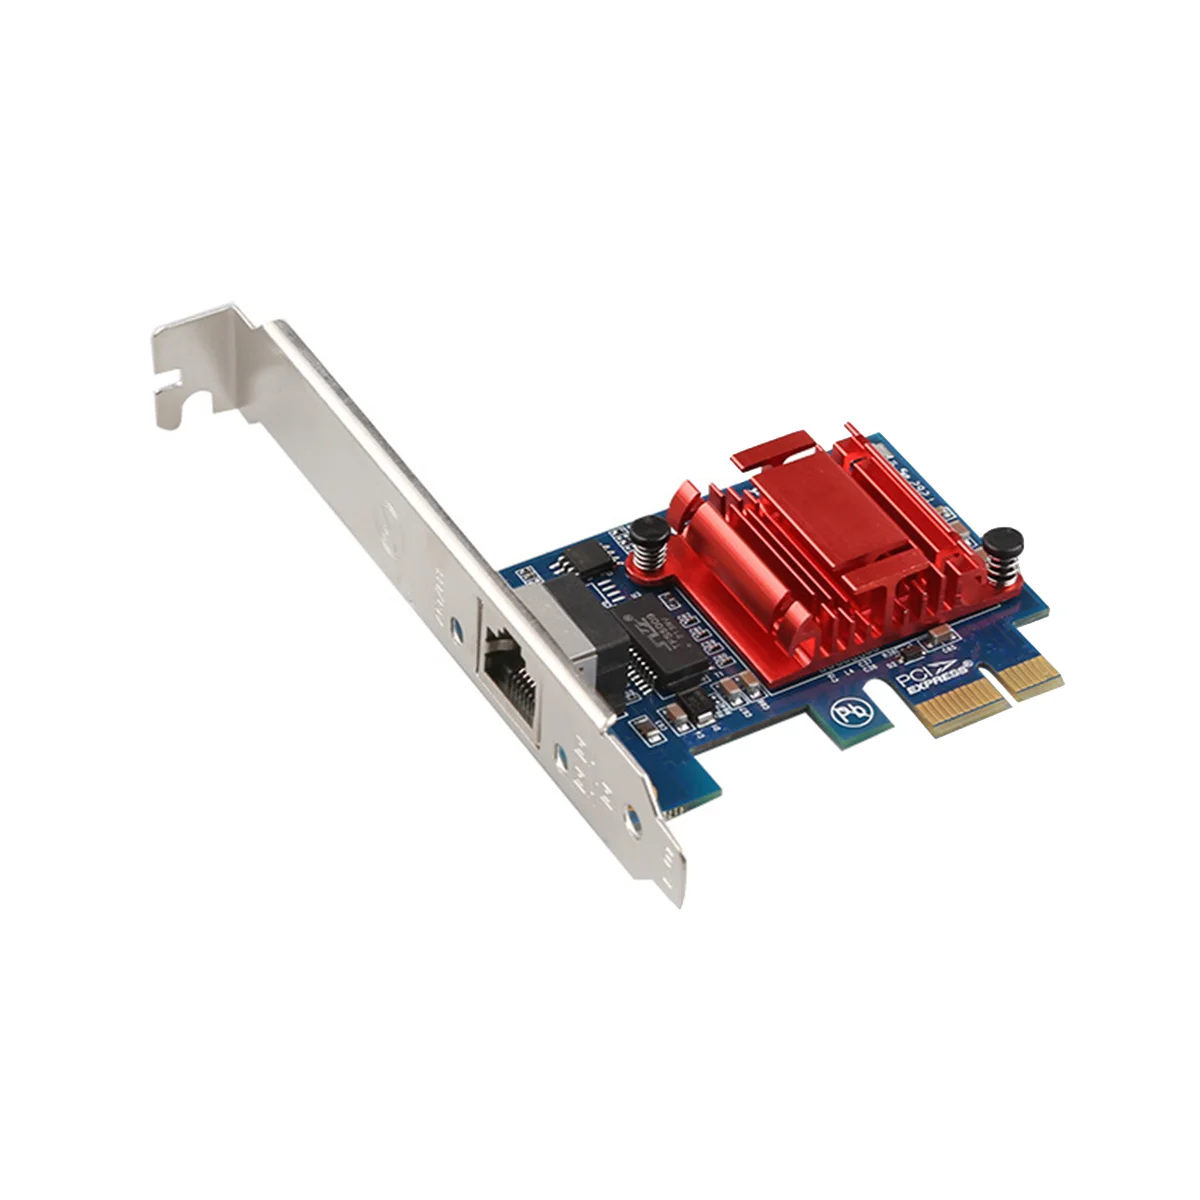 

PCIe 1X RJ45 Wireless Network Card 10/100/1000Mbps 1Gbps Fast Ethernet Lan Card BCM5721&5751 Chipset Support ROS,ESXi